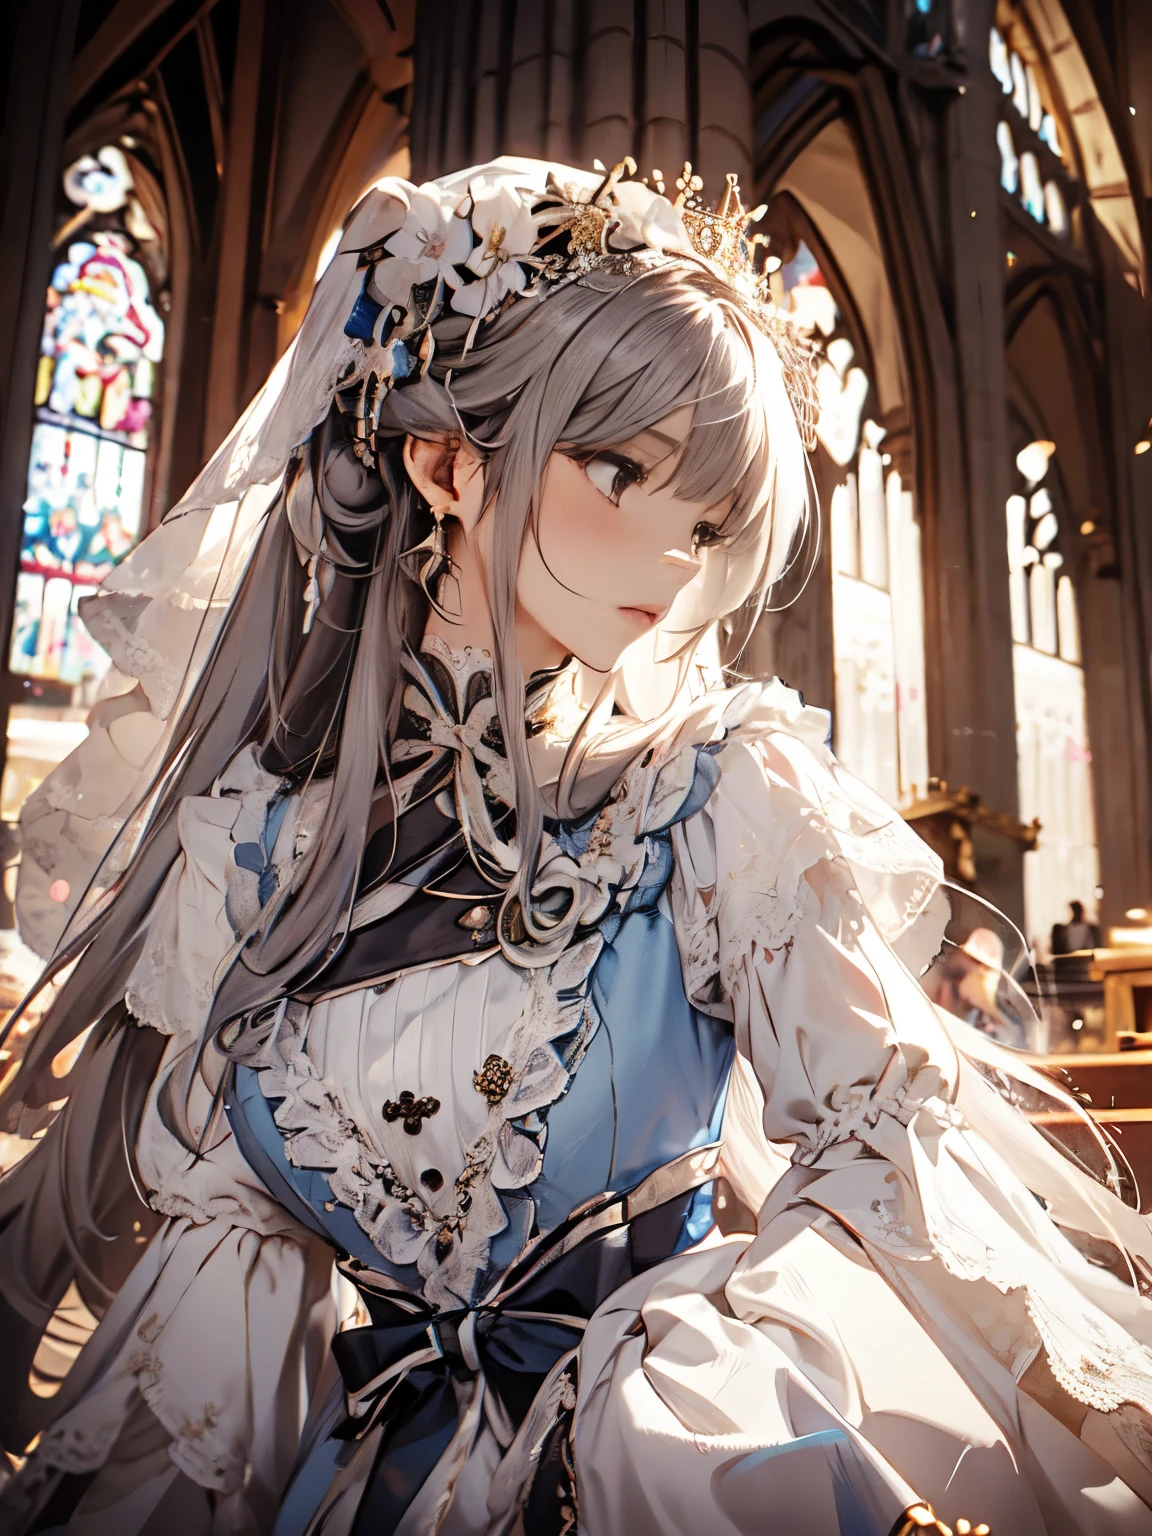 In front of the altar of a majestic church、（blurred background）、brighter light、golden long hair girl、Classic White Wedding Dresses、（elegant luster）、（Lots of races）、lots of ribbons、((voluminous puff sleeves))、long cuffs with many buttons、golden embroidery、long train、white embroidered gloves、five fingers、laughter、Redness of the cheeks